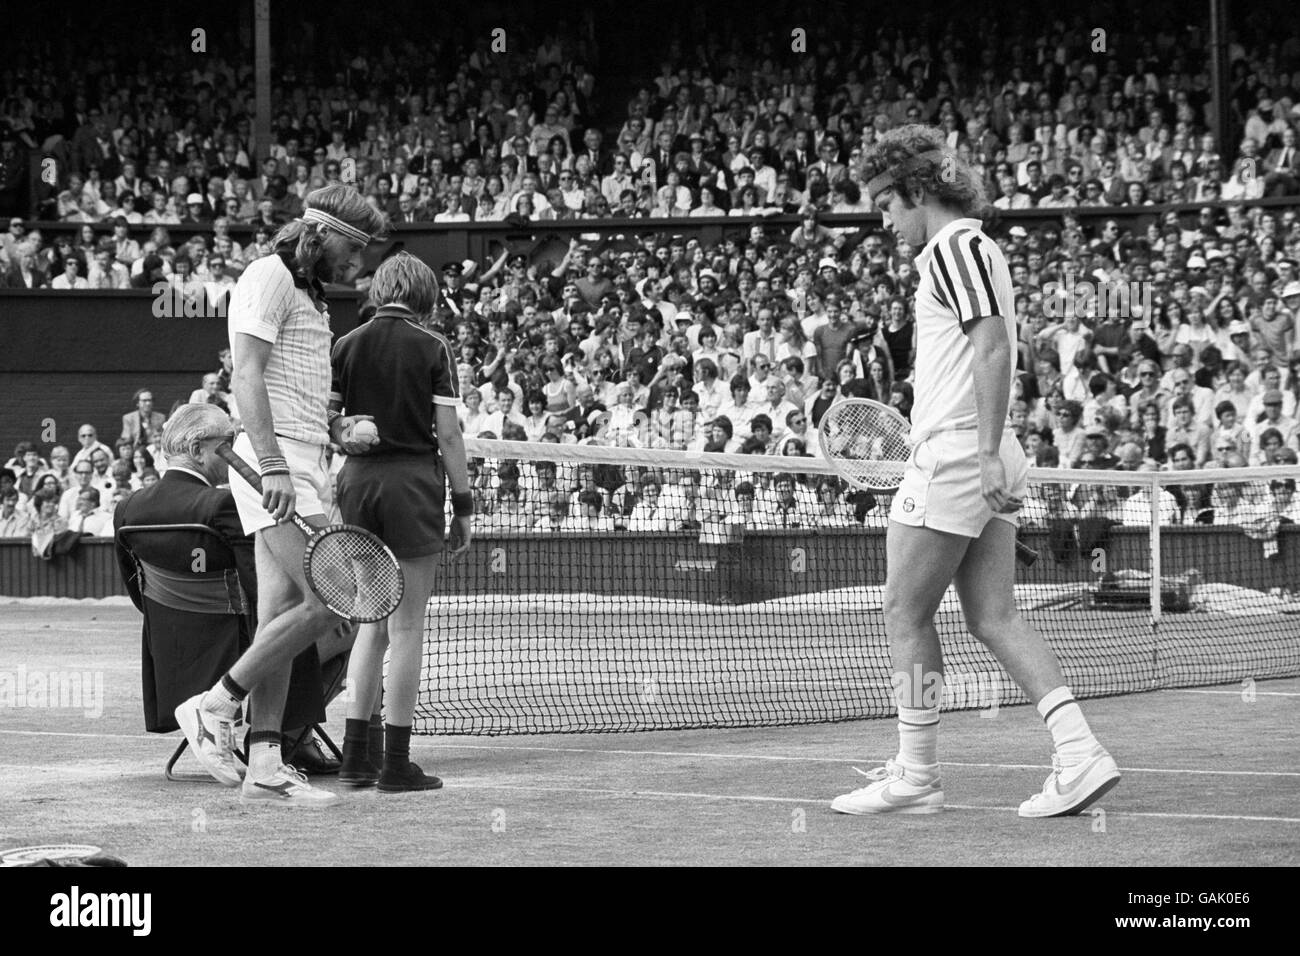 Sweden's Bjorn Borg swaps sides with John MacEnroe on the Centre Court at Wimbledon where he won his fifth successive men's singles title with a thrilling five sets victory over 21-year old American John McEnroe. Stock Photo